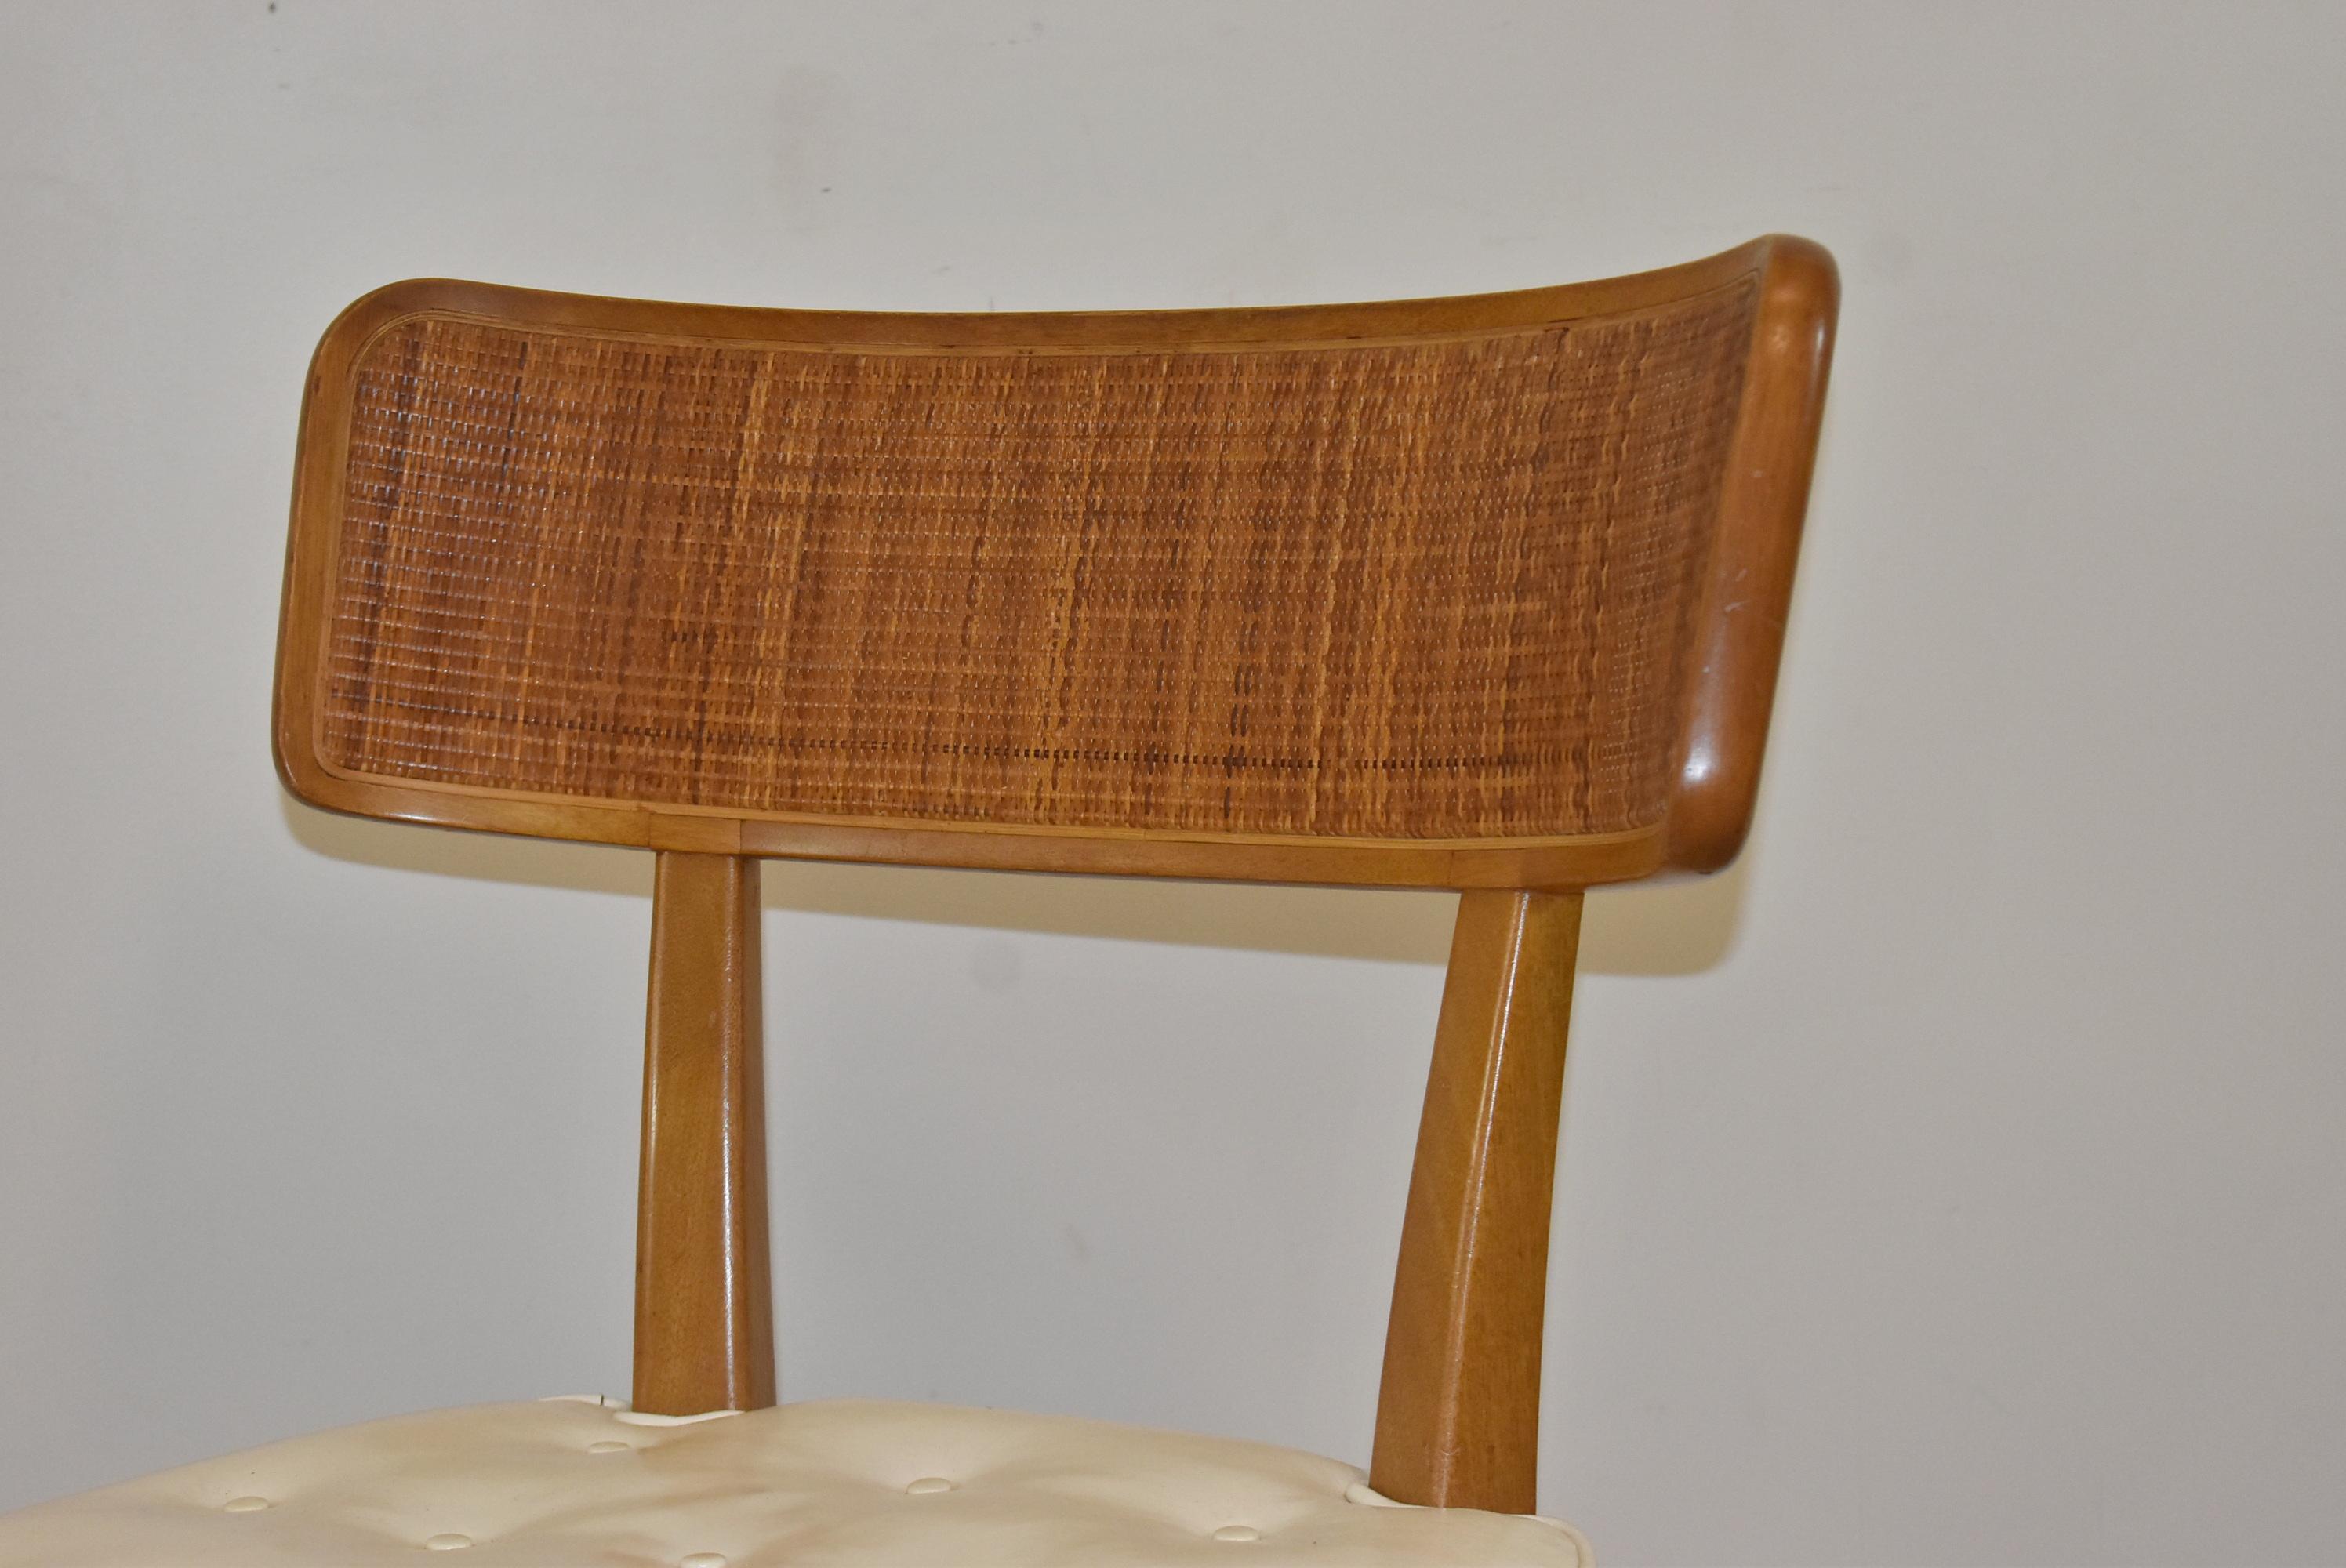 Six Vintage Dunbar Dining Chairs Cane Back Edward Wormley Design, circa 1950's In Good Condition For Sale In Toledo, OH